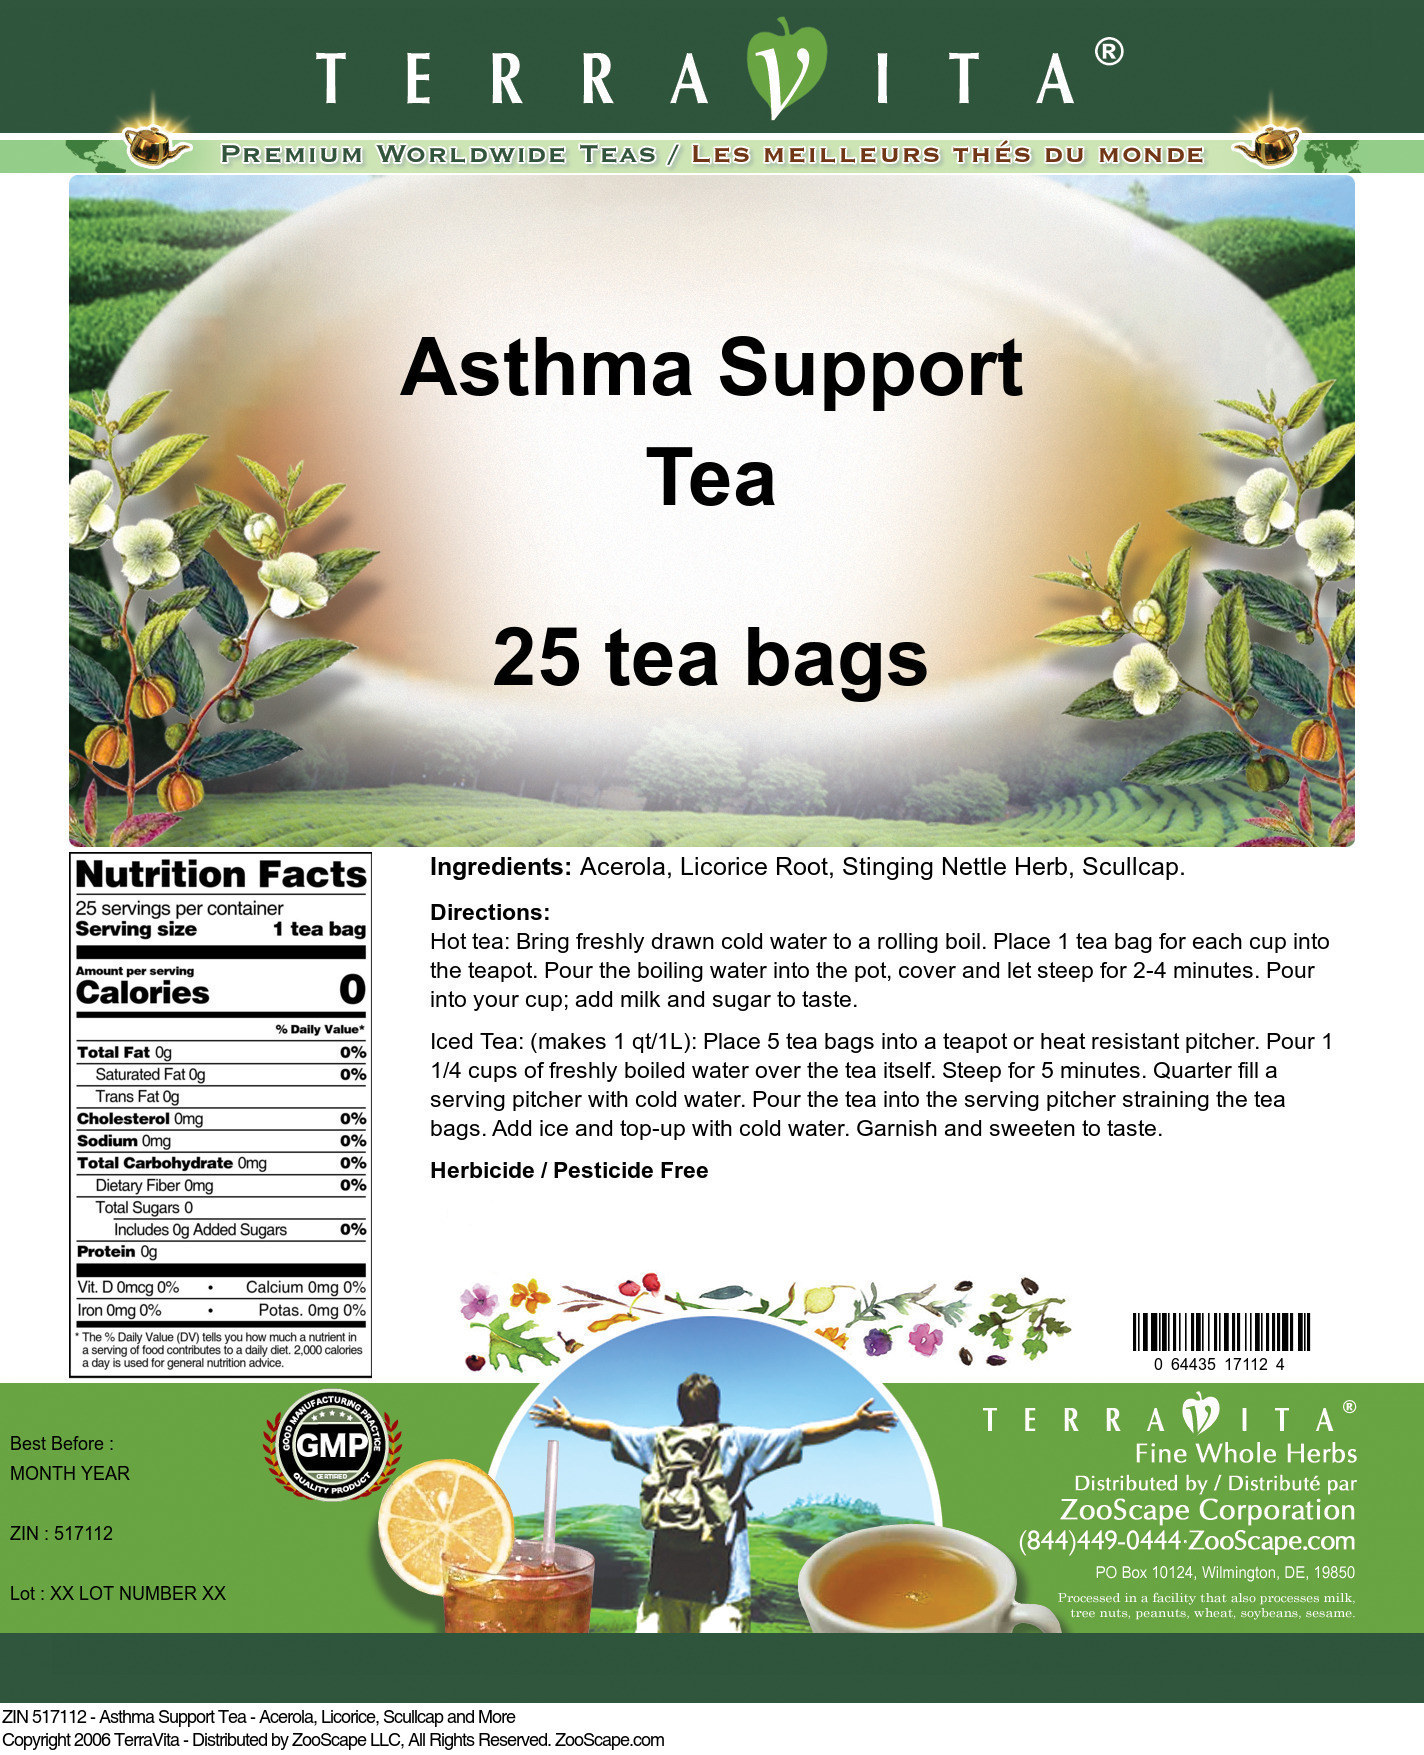 Asthma Support Tea - Acerola, Licorice, Scullcap and More - Label